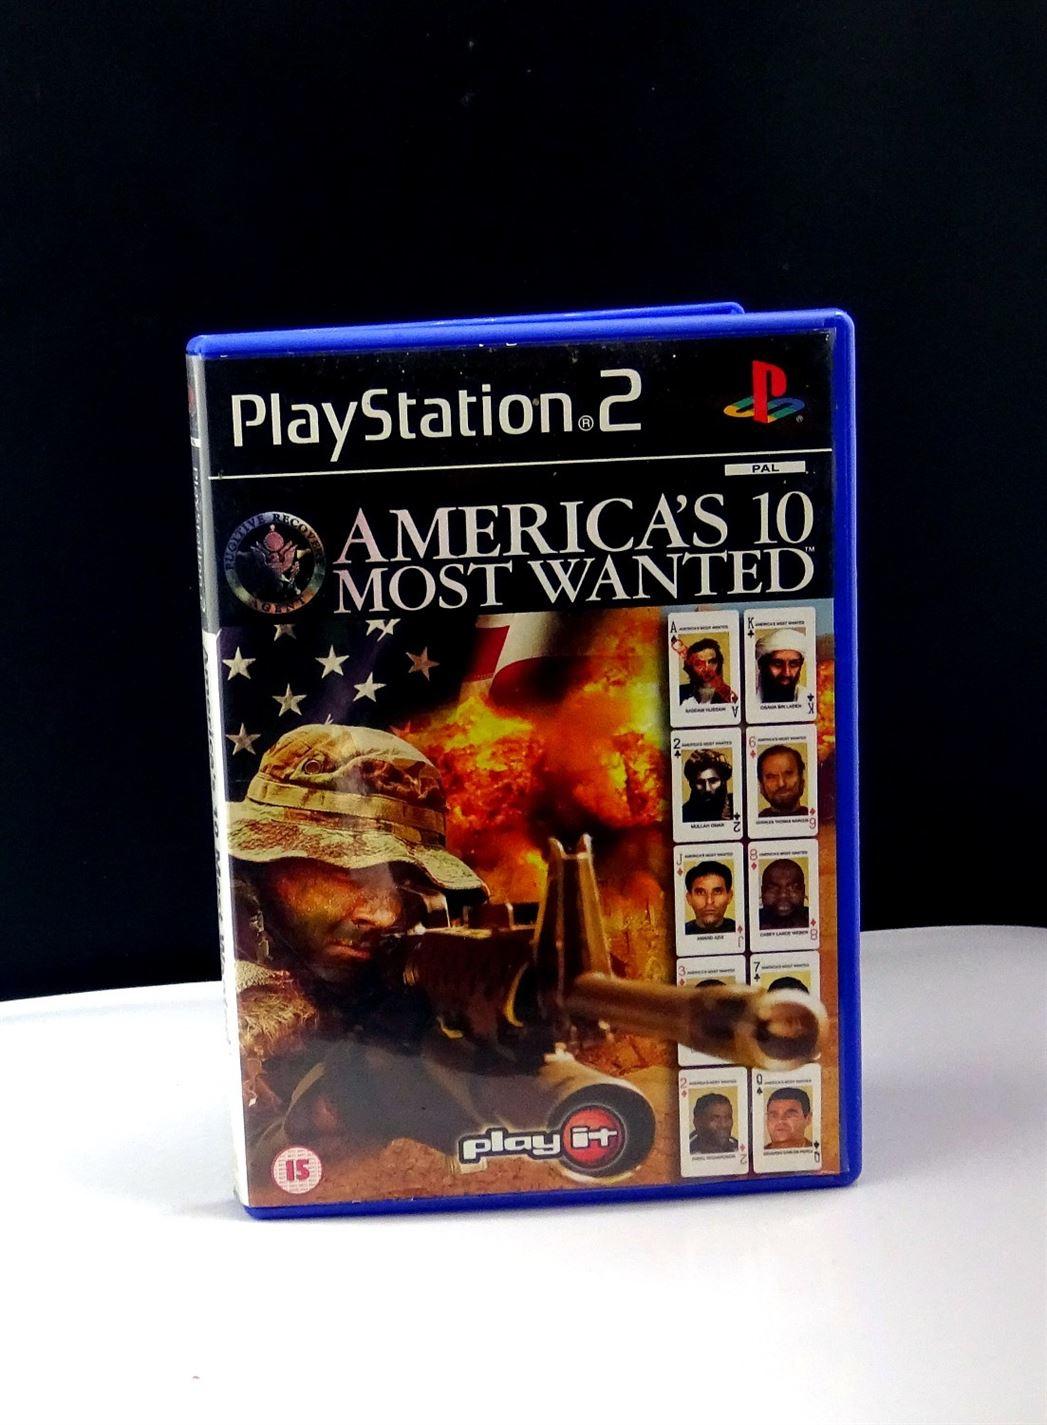 America's 10 Most Wanted PS2 (PlayStation 2) -  UK Seller 5060057021323